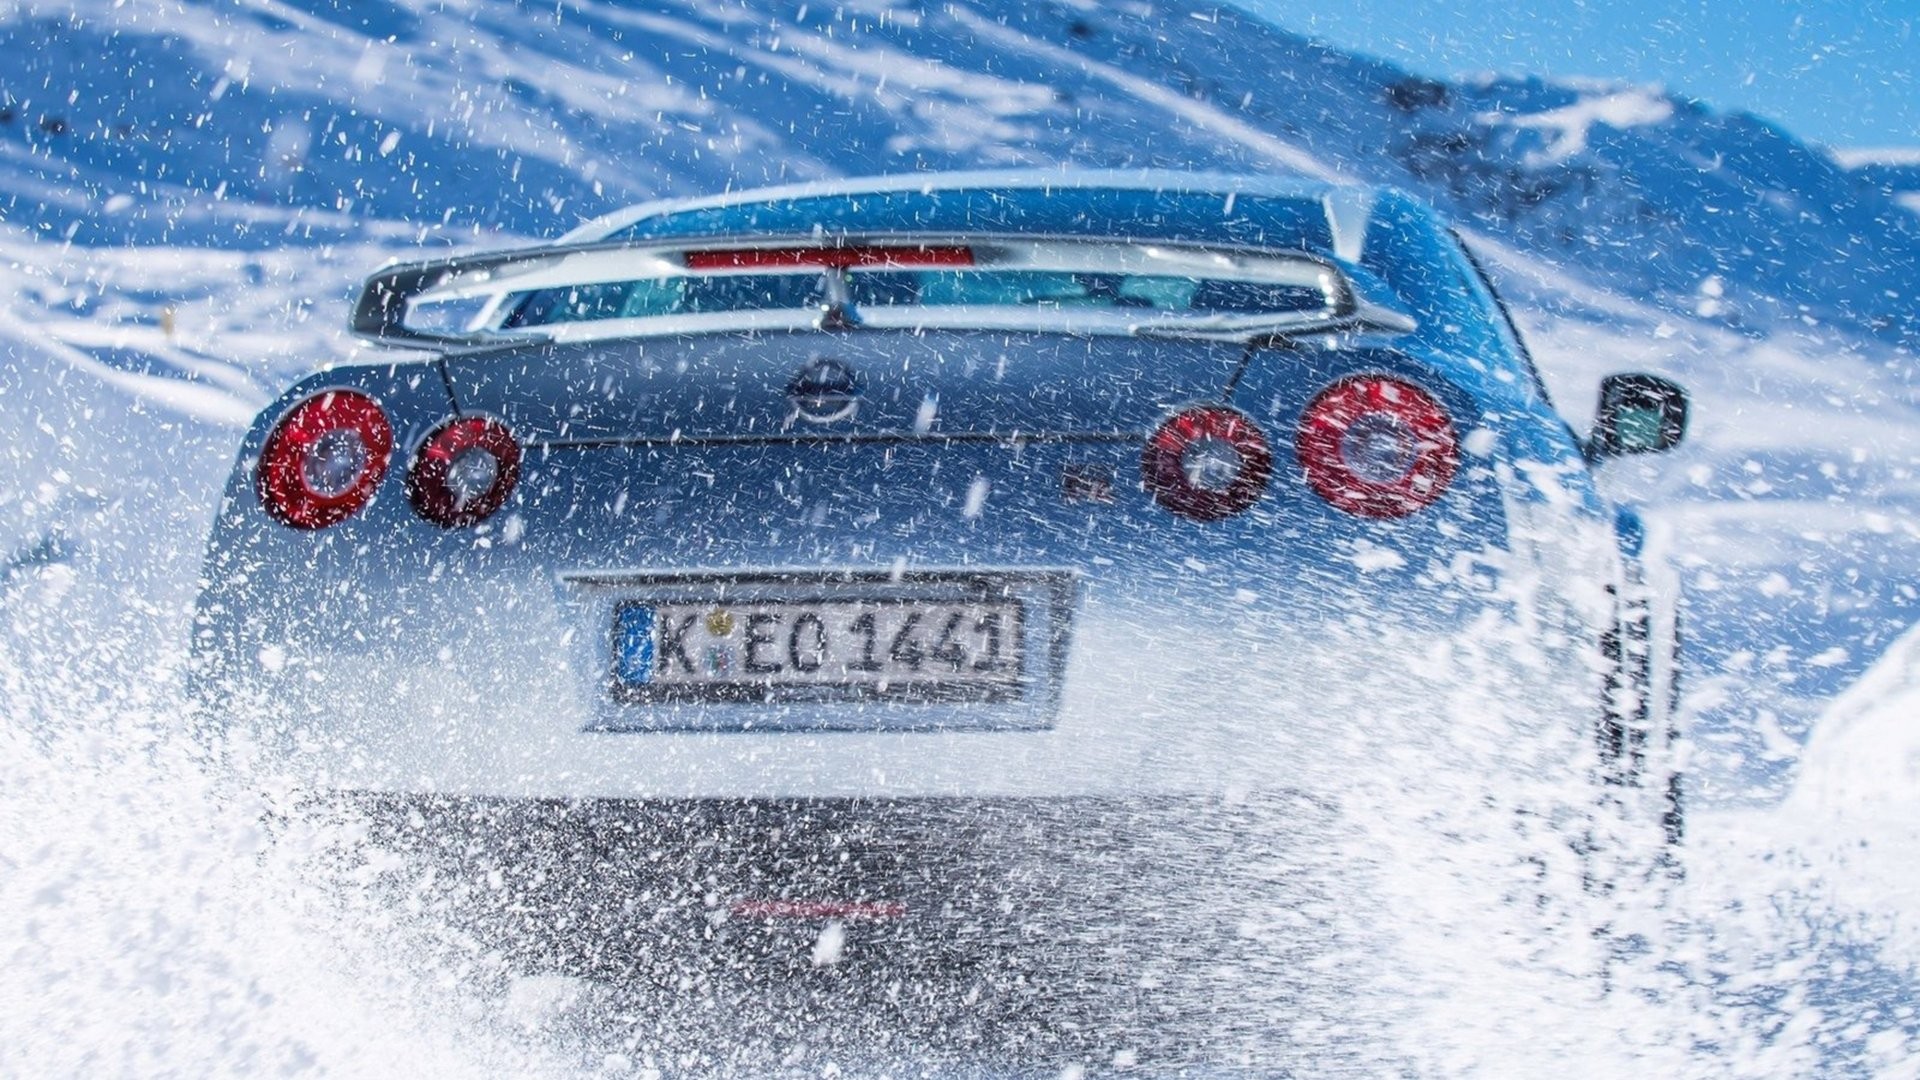 General 1920x1080 Nissan Nissan GT-R winter car snow blue vehicle numbers outdoors